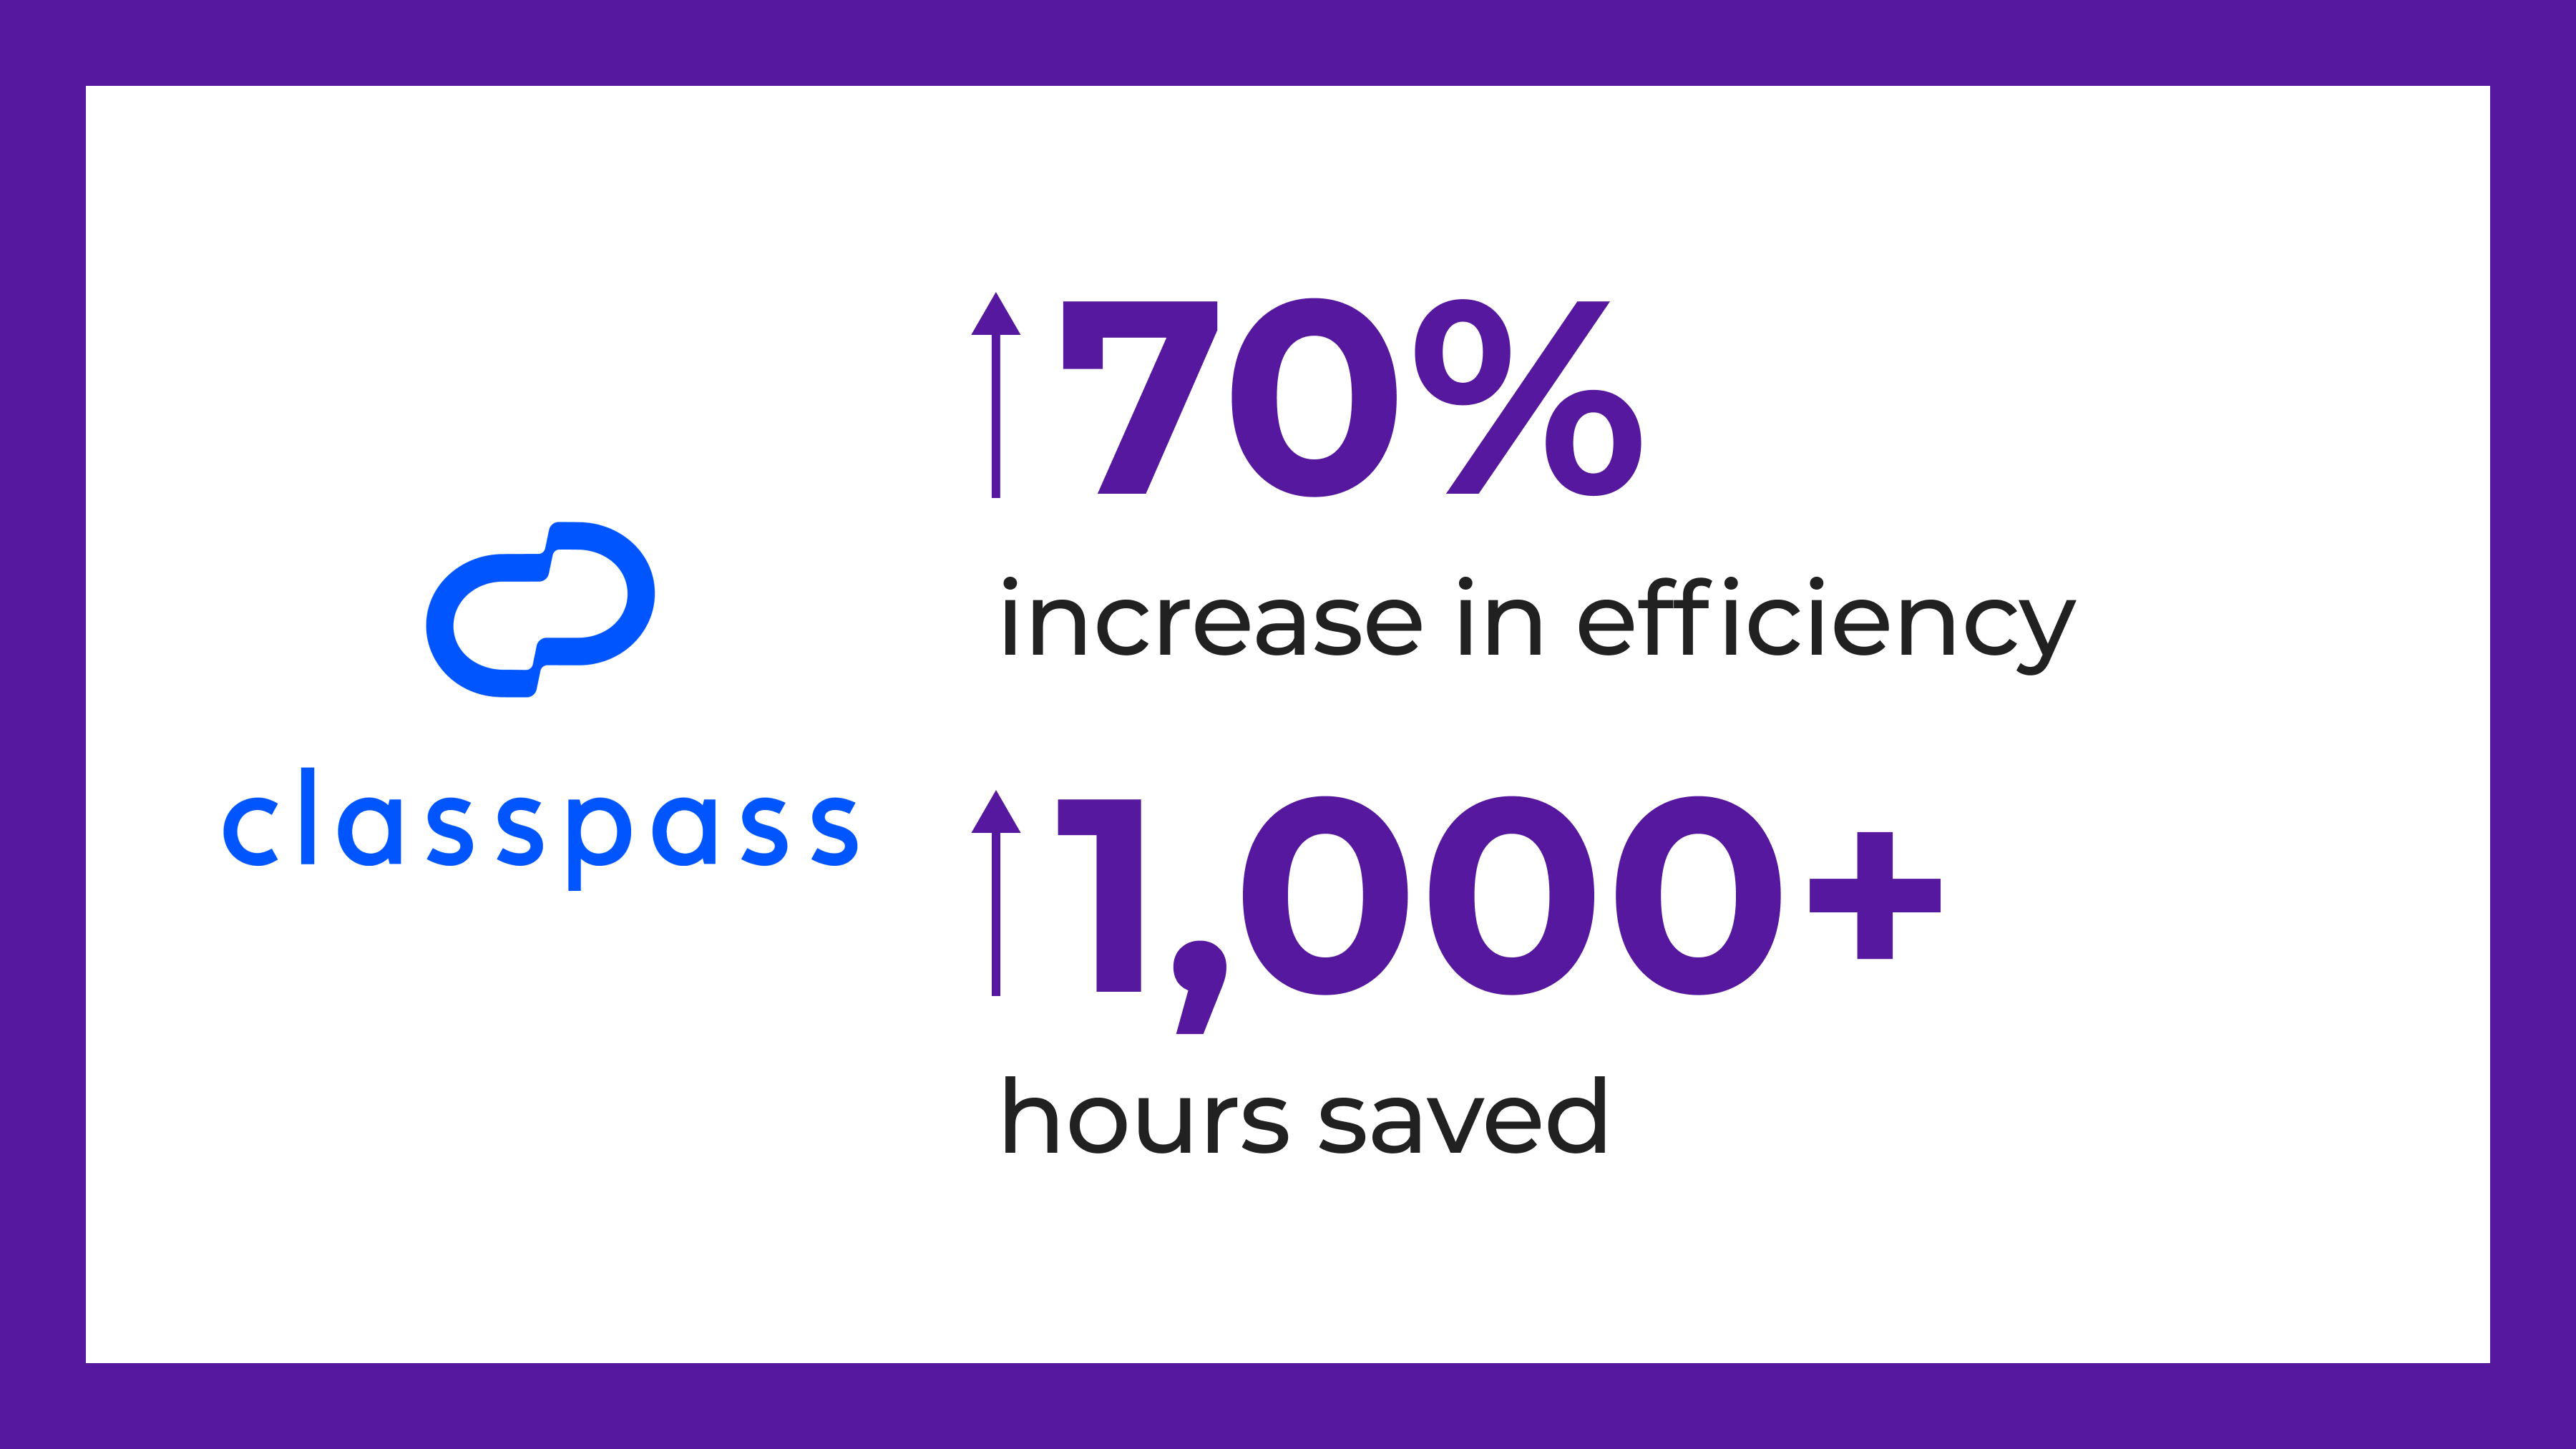 ClassPass localizes their content for marketing, legal, product development, and customer experience. With Smartling, they increased their efficiency 70% and saved over 1,000 hours of manual work.